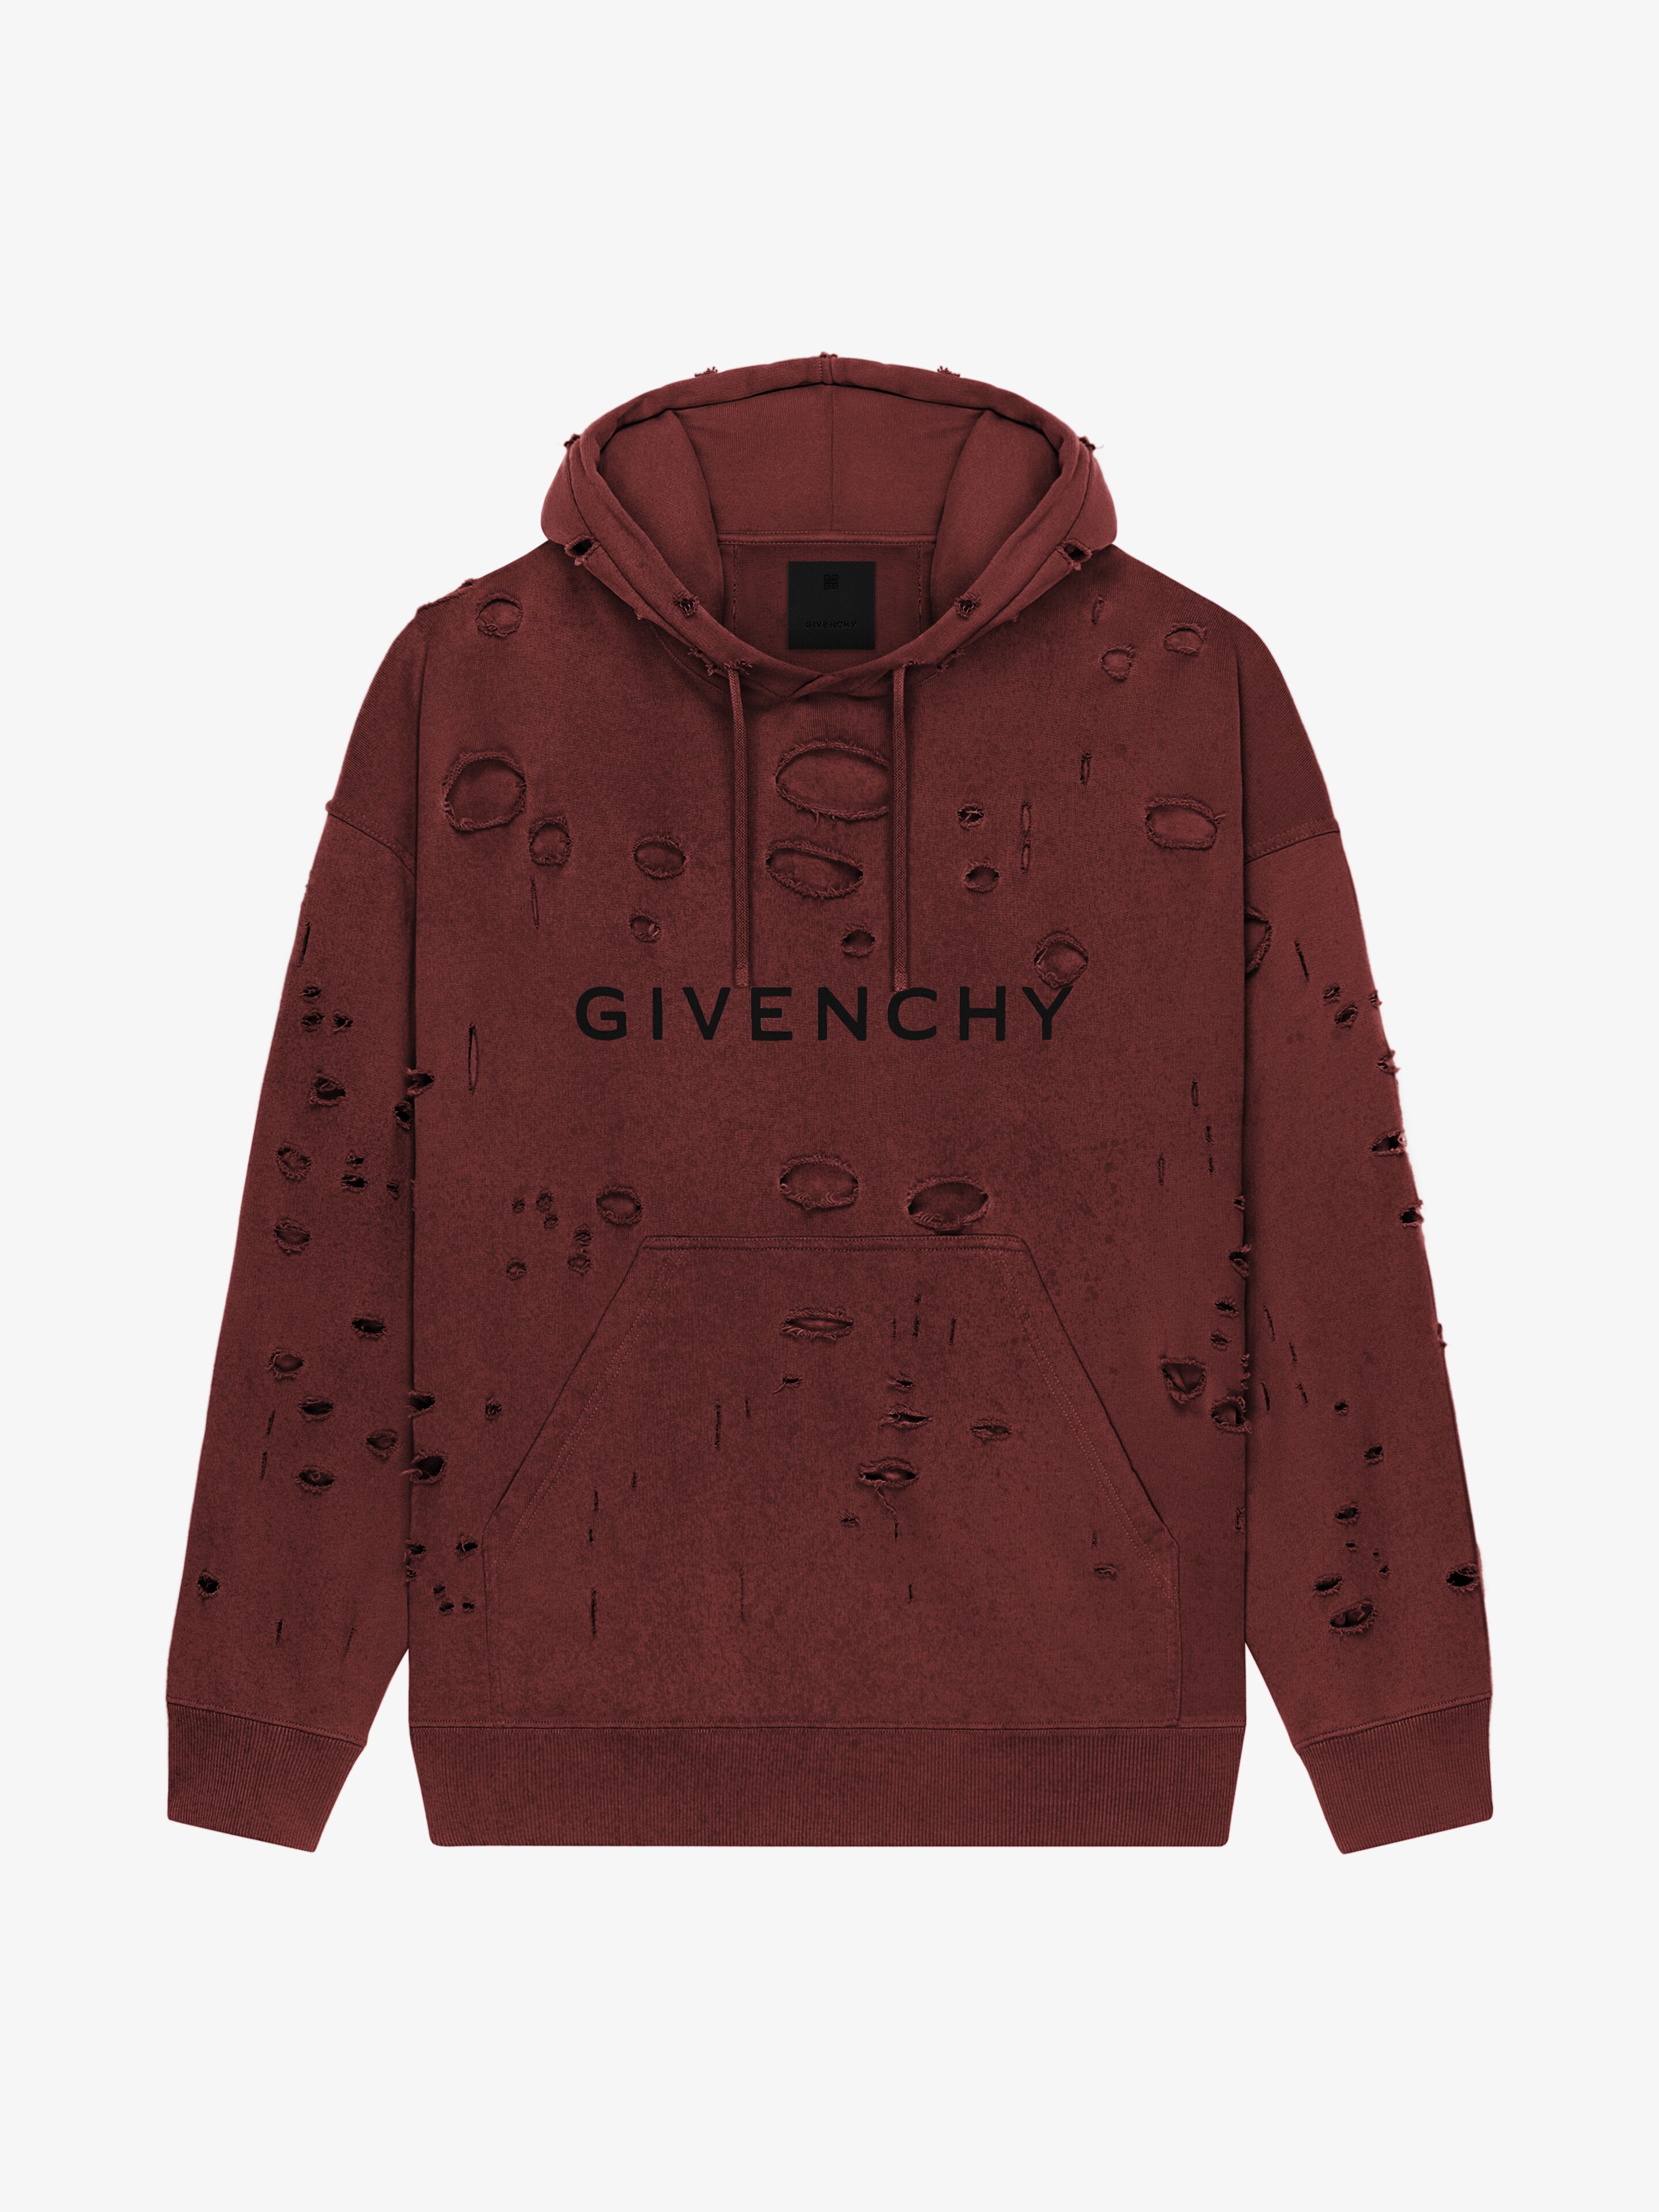 Shop GIVENCHY Givenchy hoodie in felpa with destroyed effect (BMJ0KF3Y8Y)  by ROHA